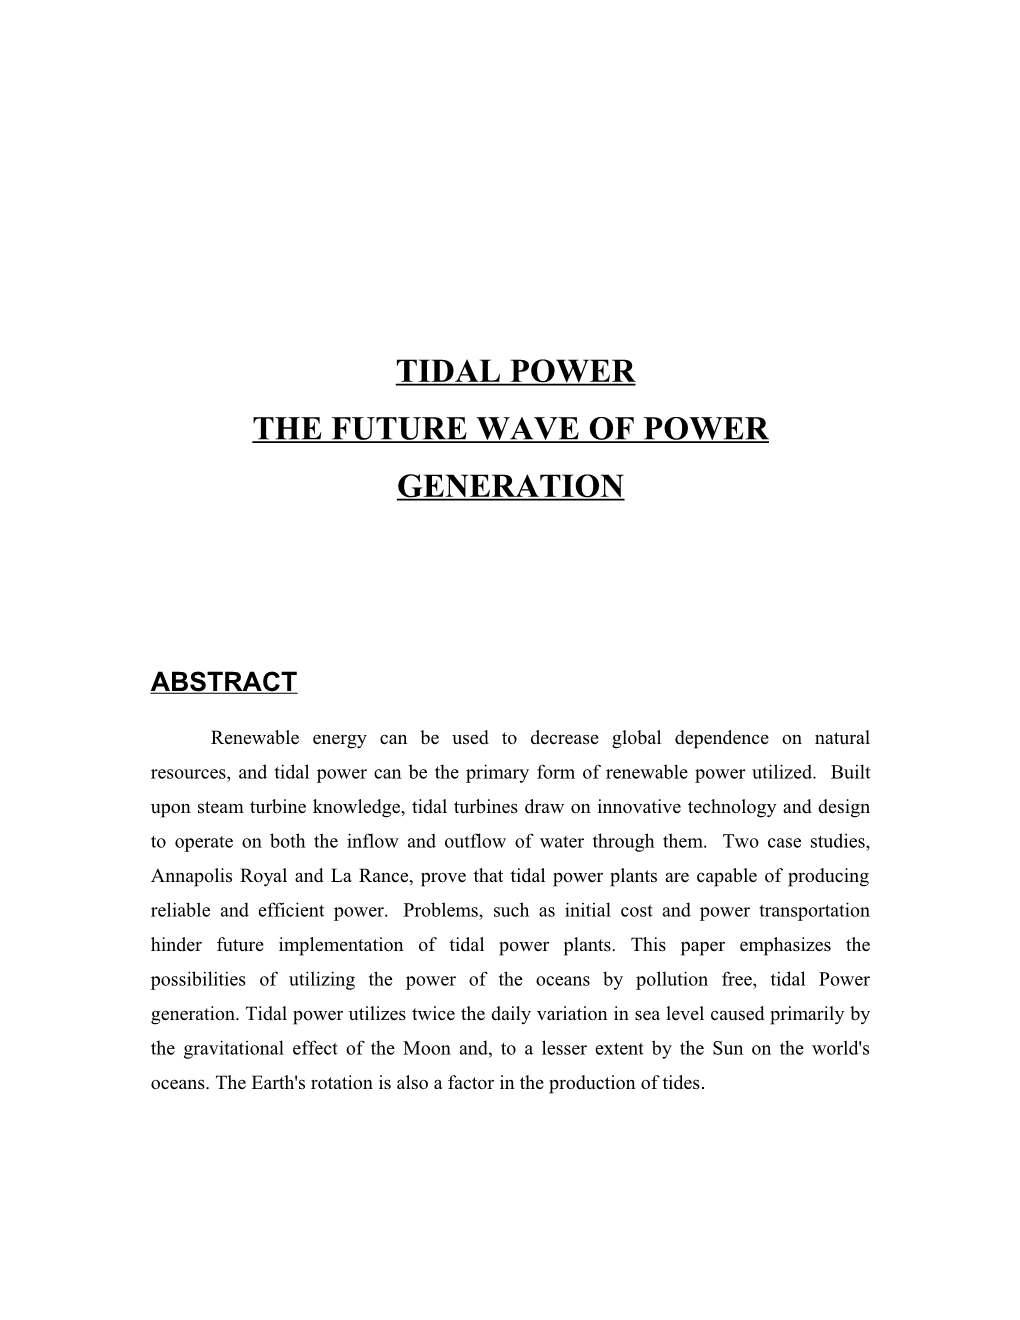 The Future Wave of Power Generation